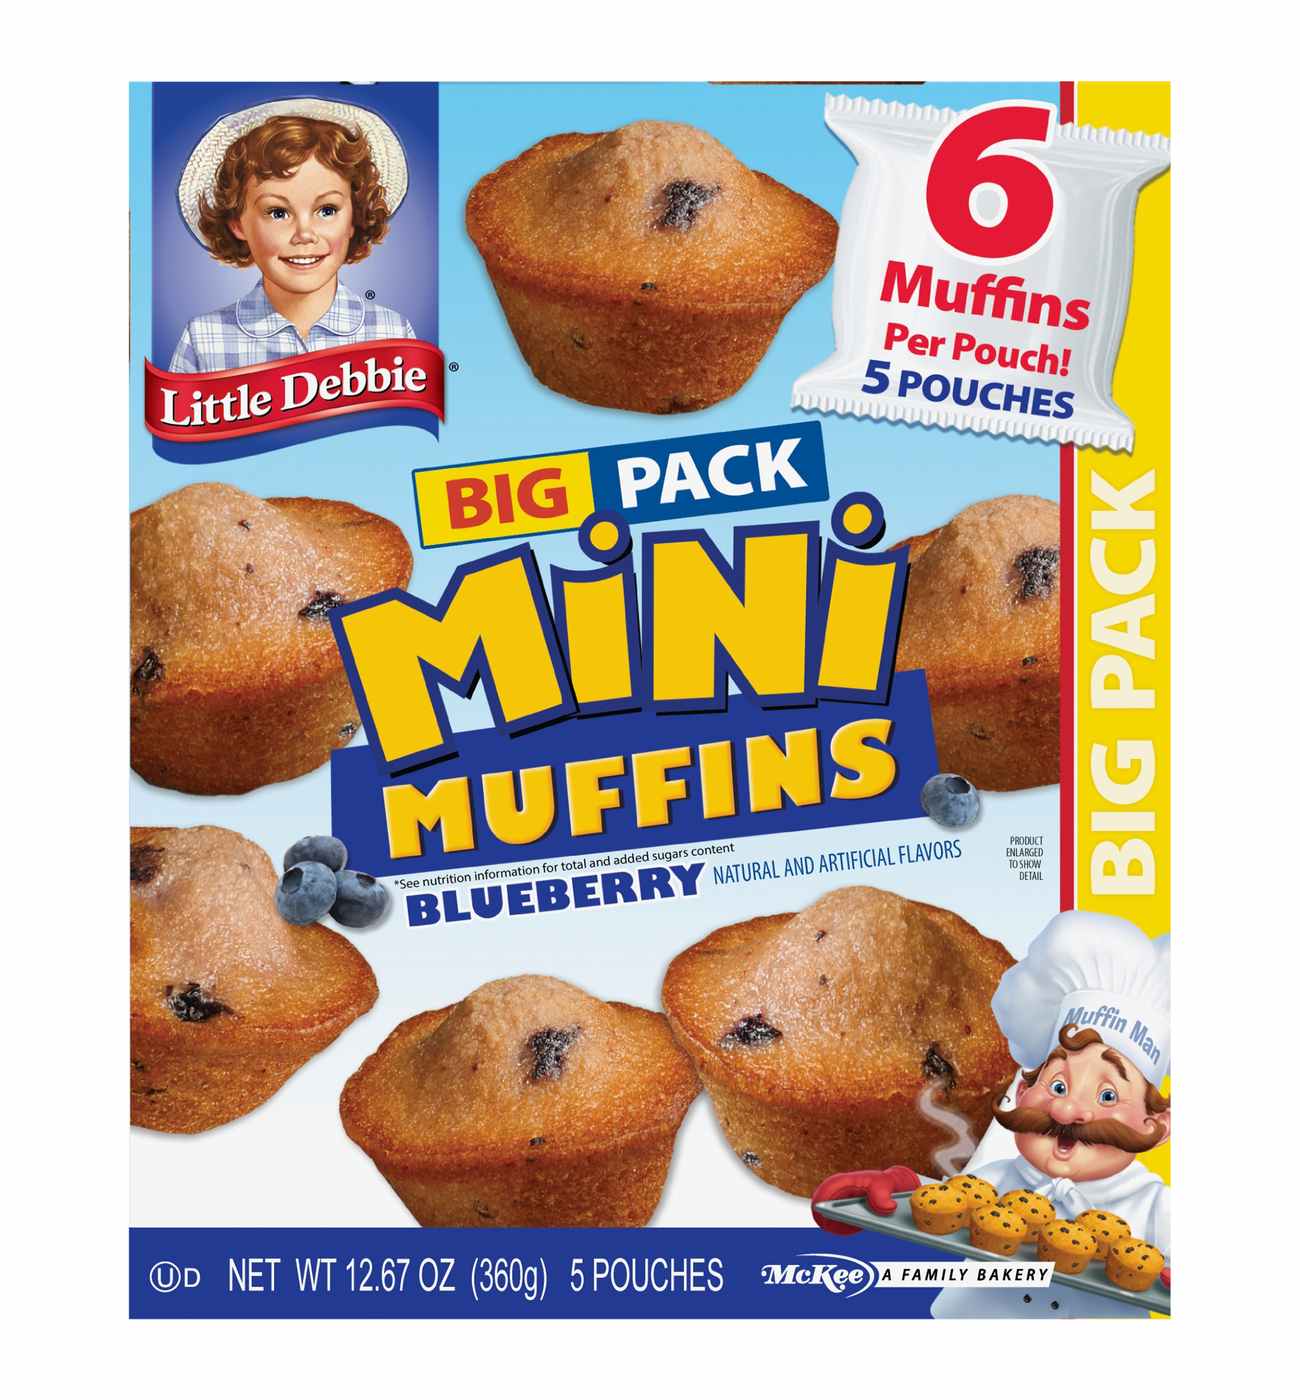 LITTLE DEBBIE Blueberry Mini Muffins Big Pack; image 1 of 3